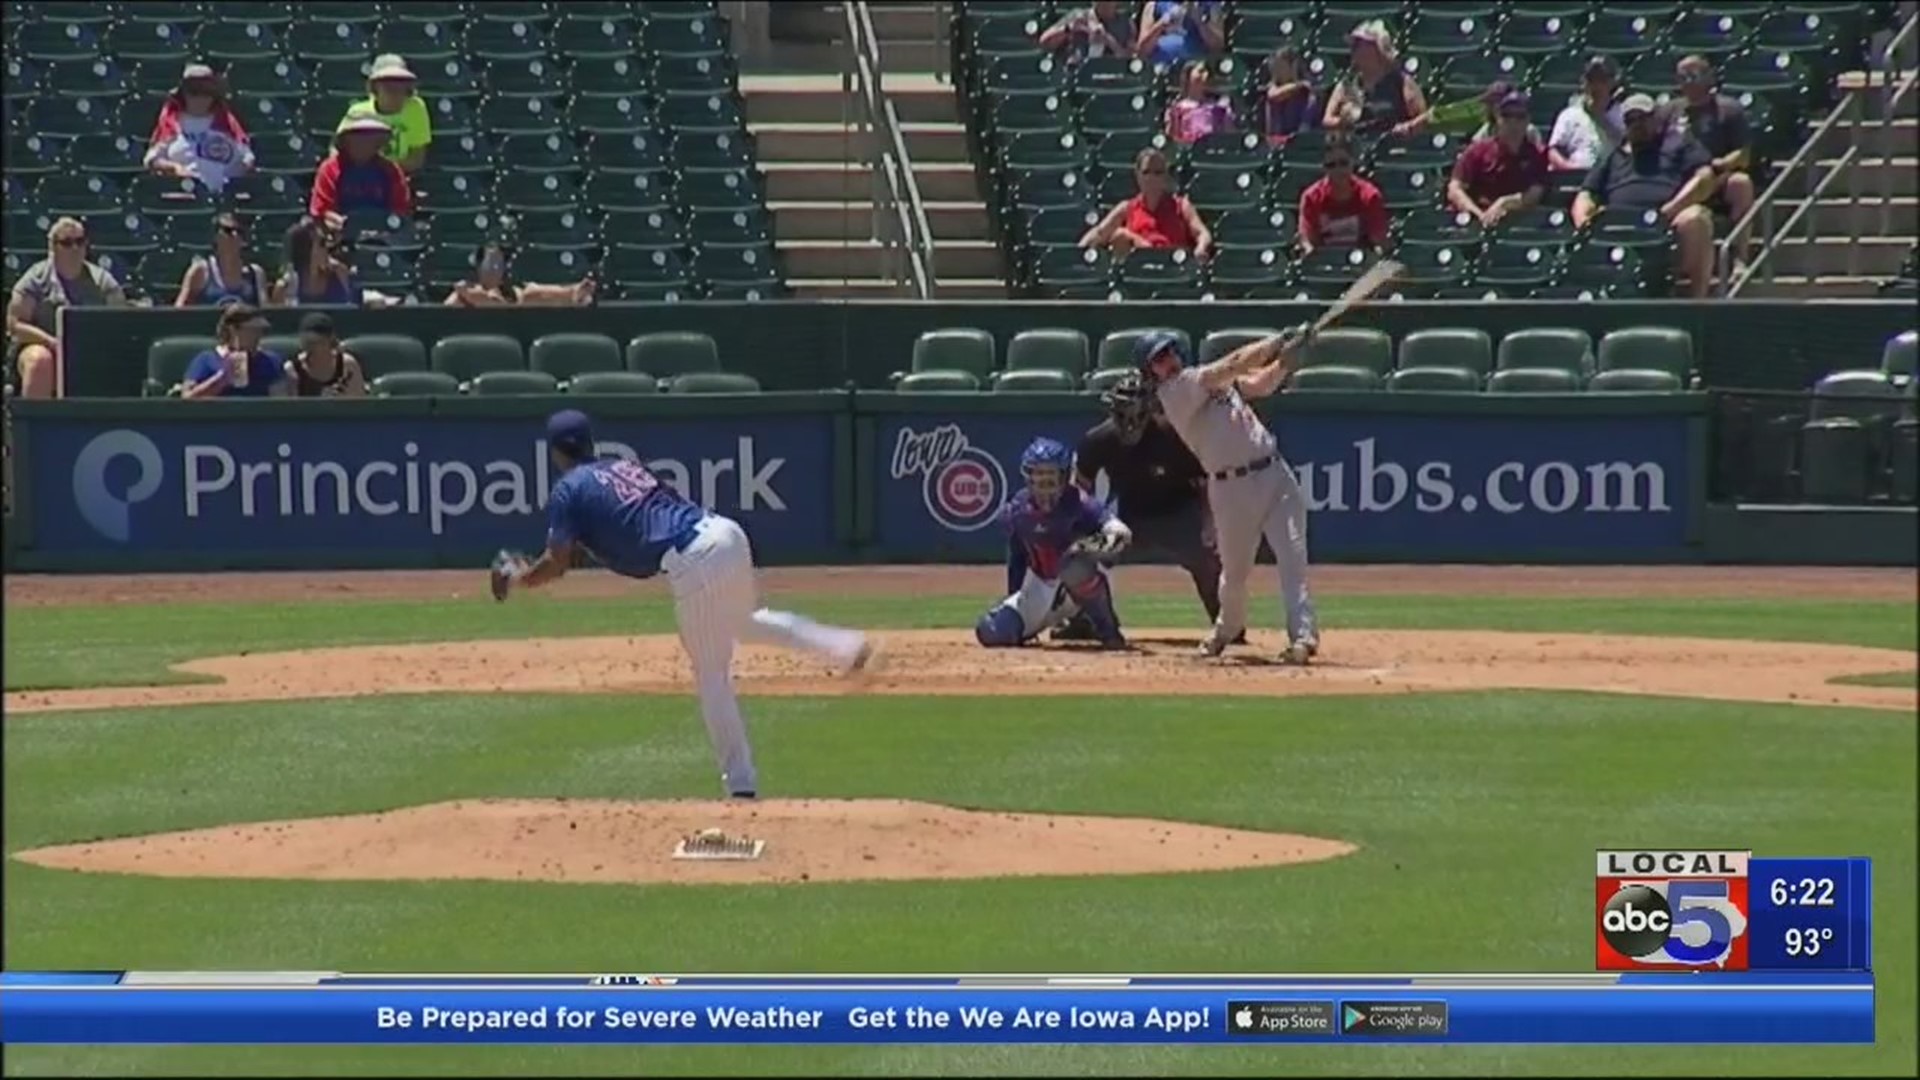 I-Cubs crushed in double-digit loss